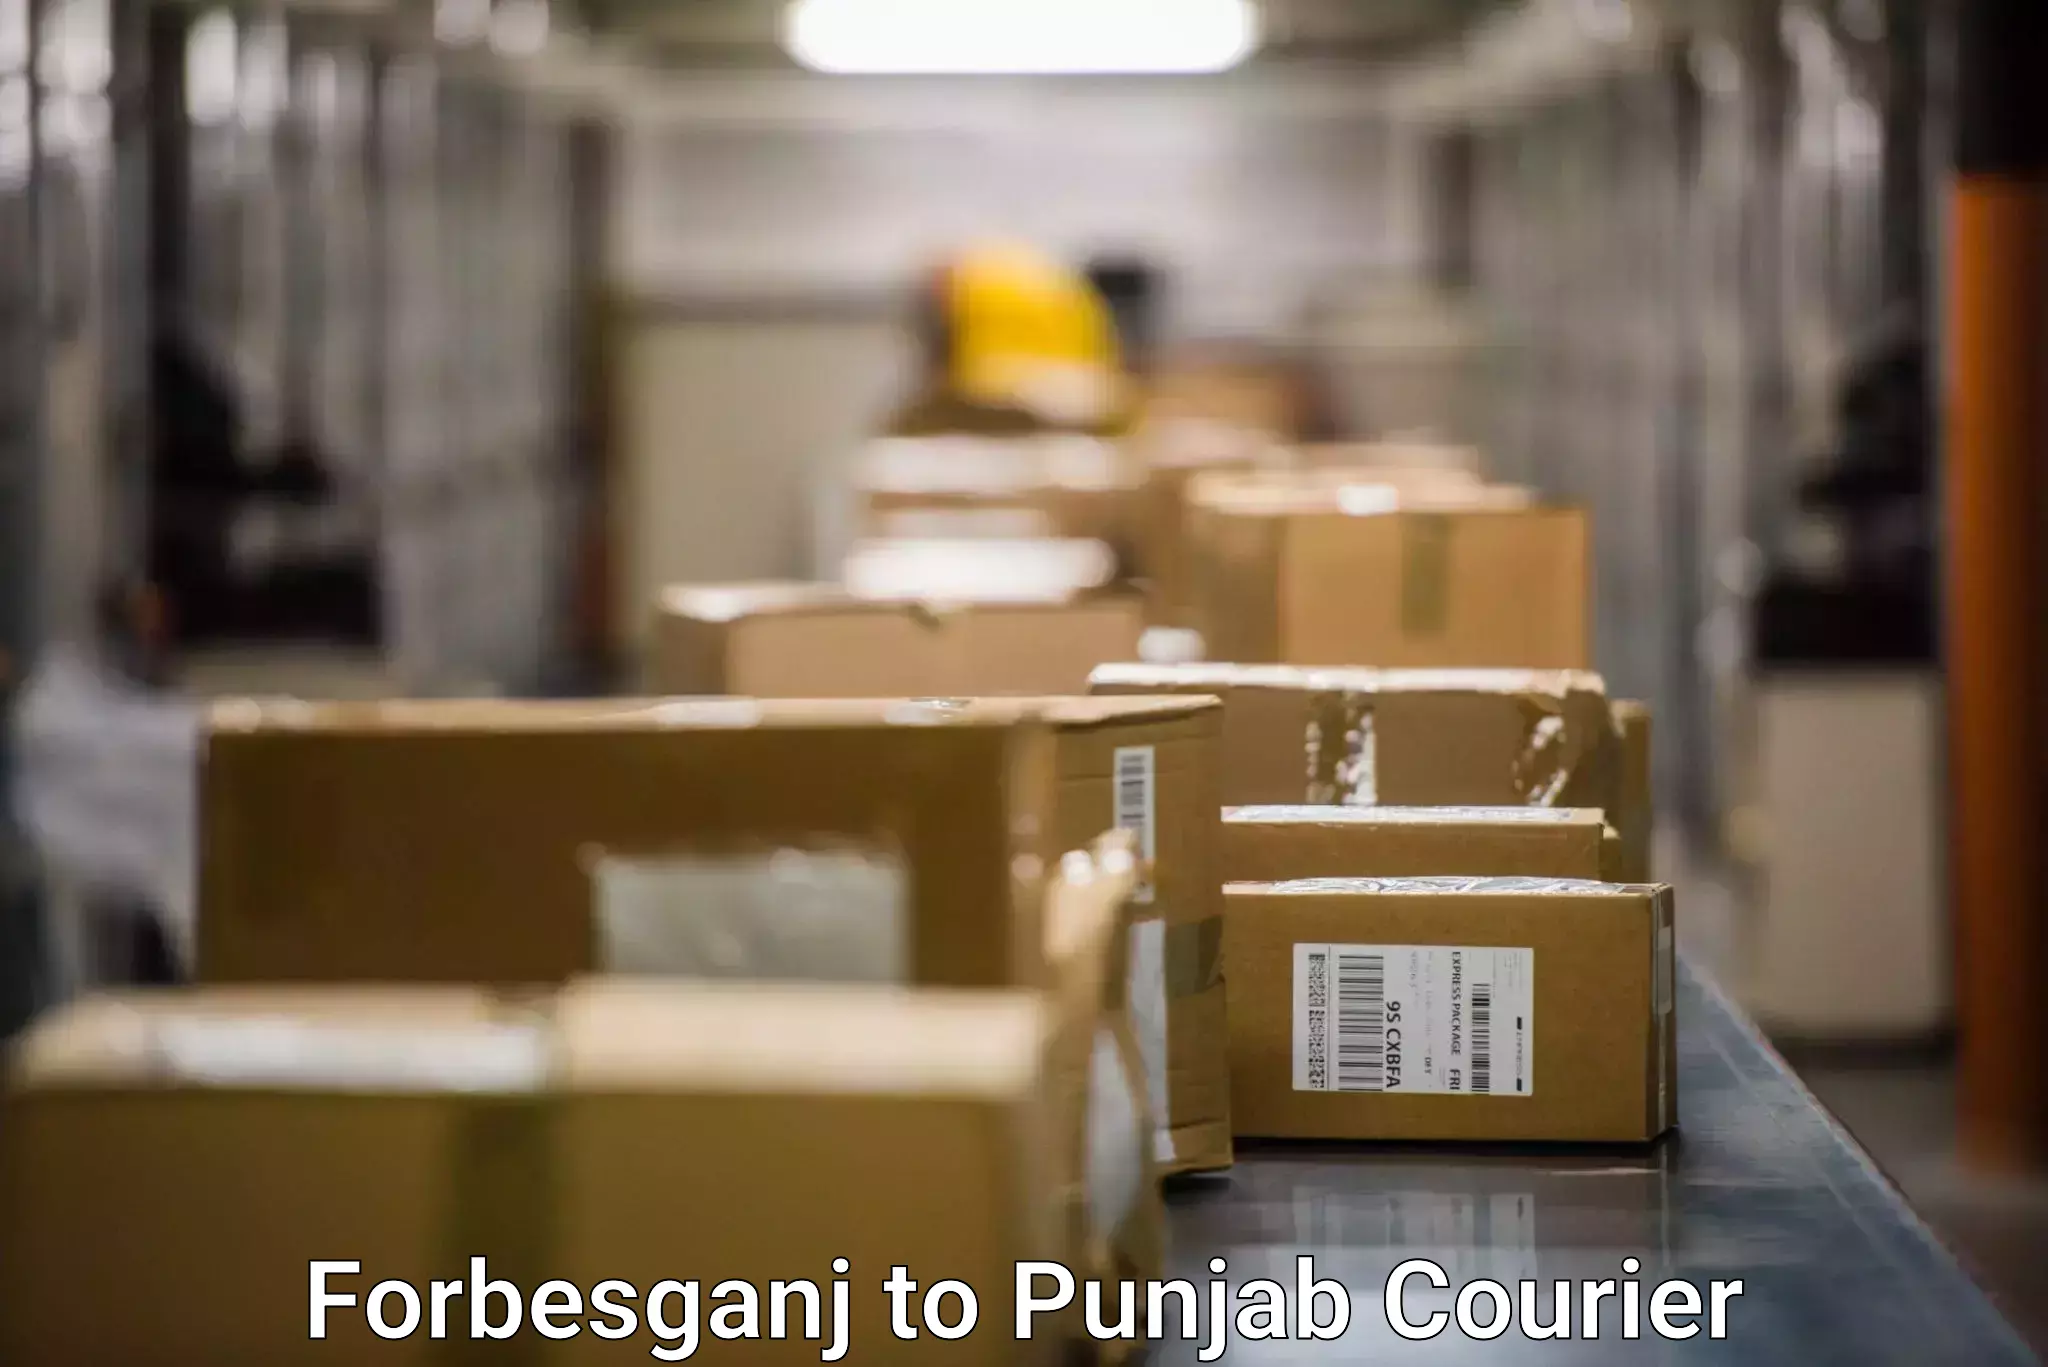 Comprehensive shipping network Forbesganj to Phillaur